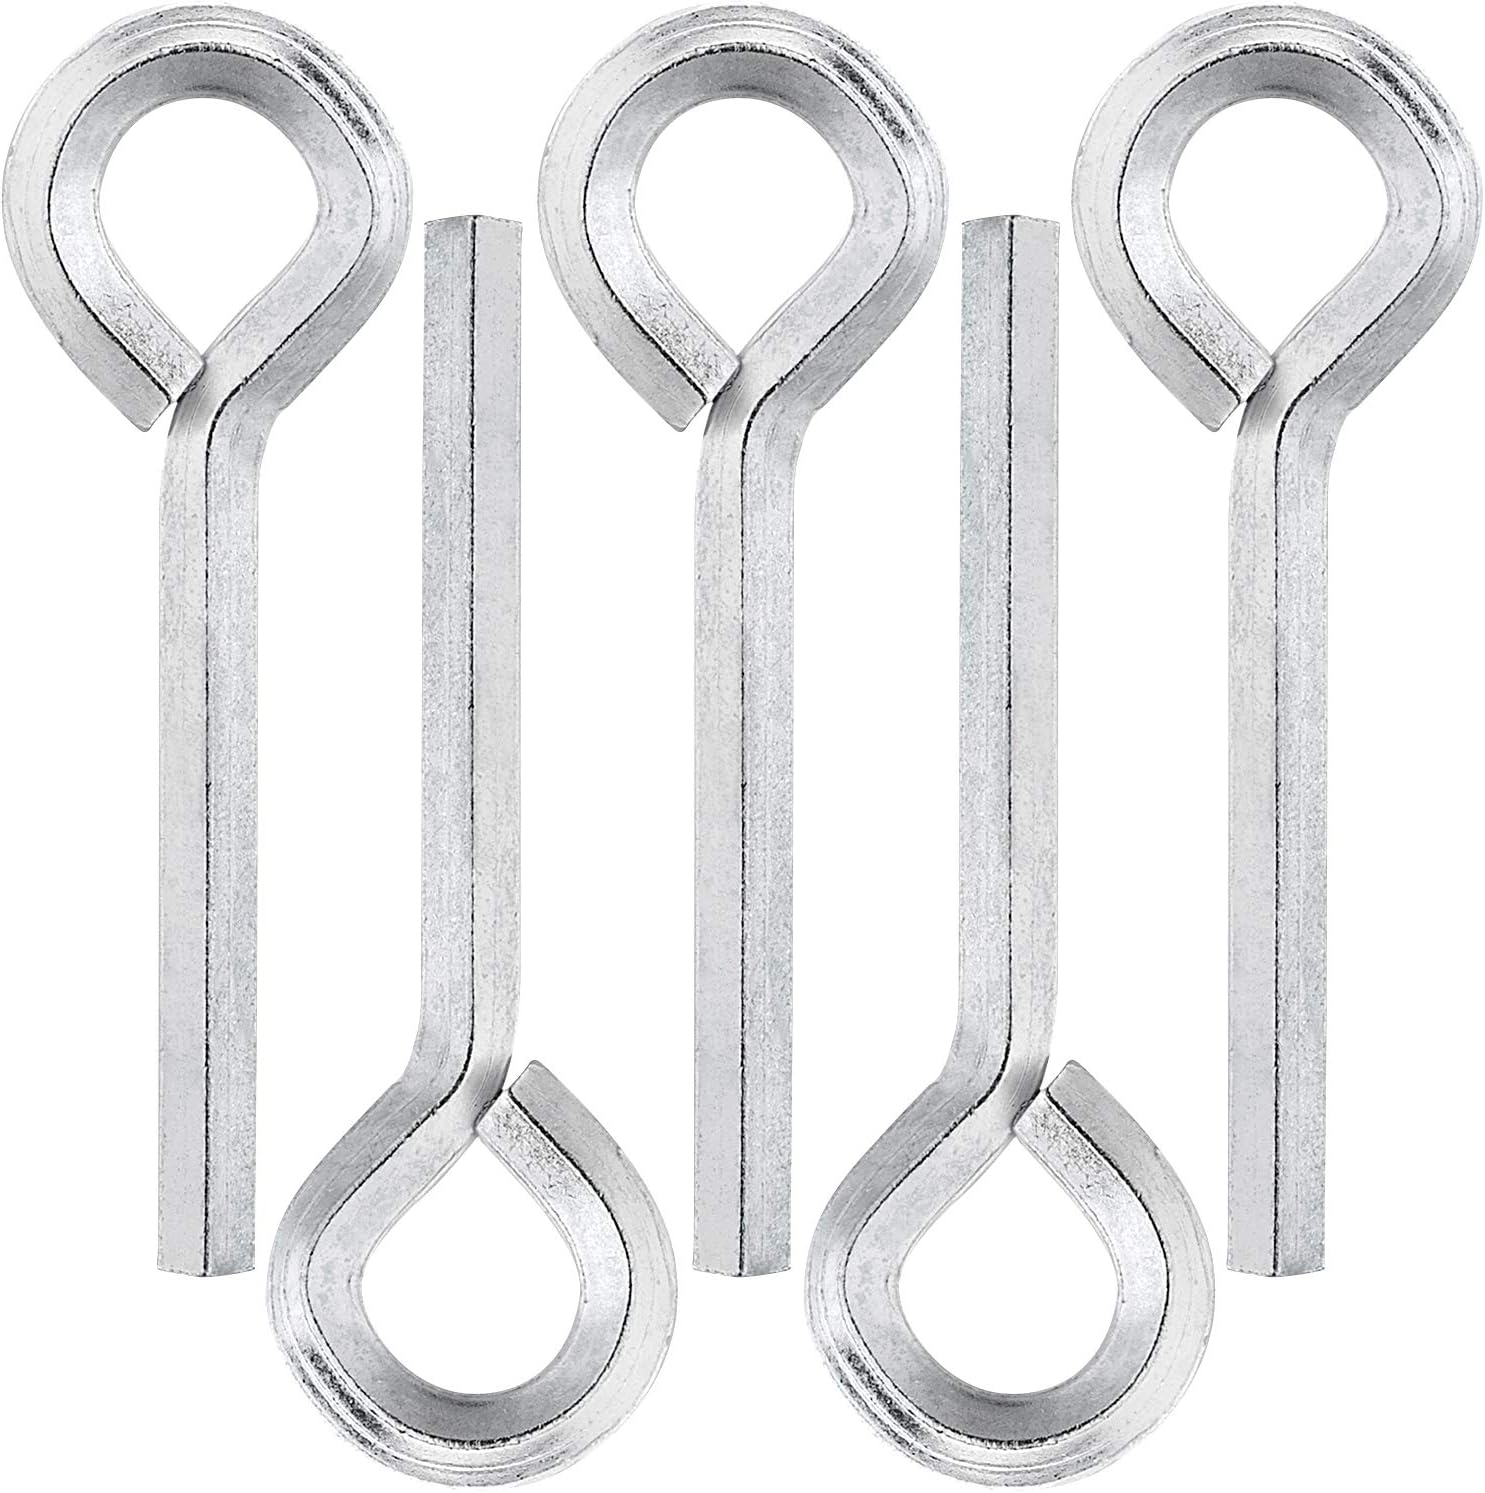 Pagow Standard Hex Dogging Key with Full Loop, Allen Wrench Door Key for Push Bar Panic Exit Devices (5 Pack 7/32 inch)